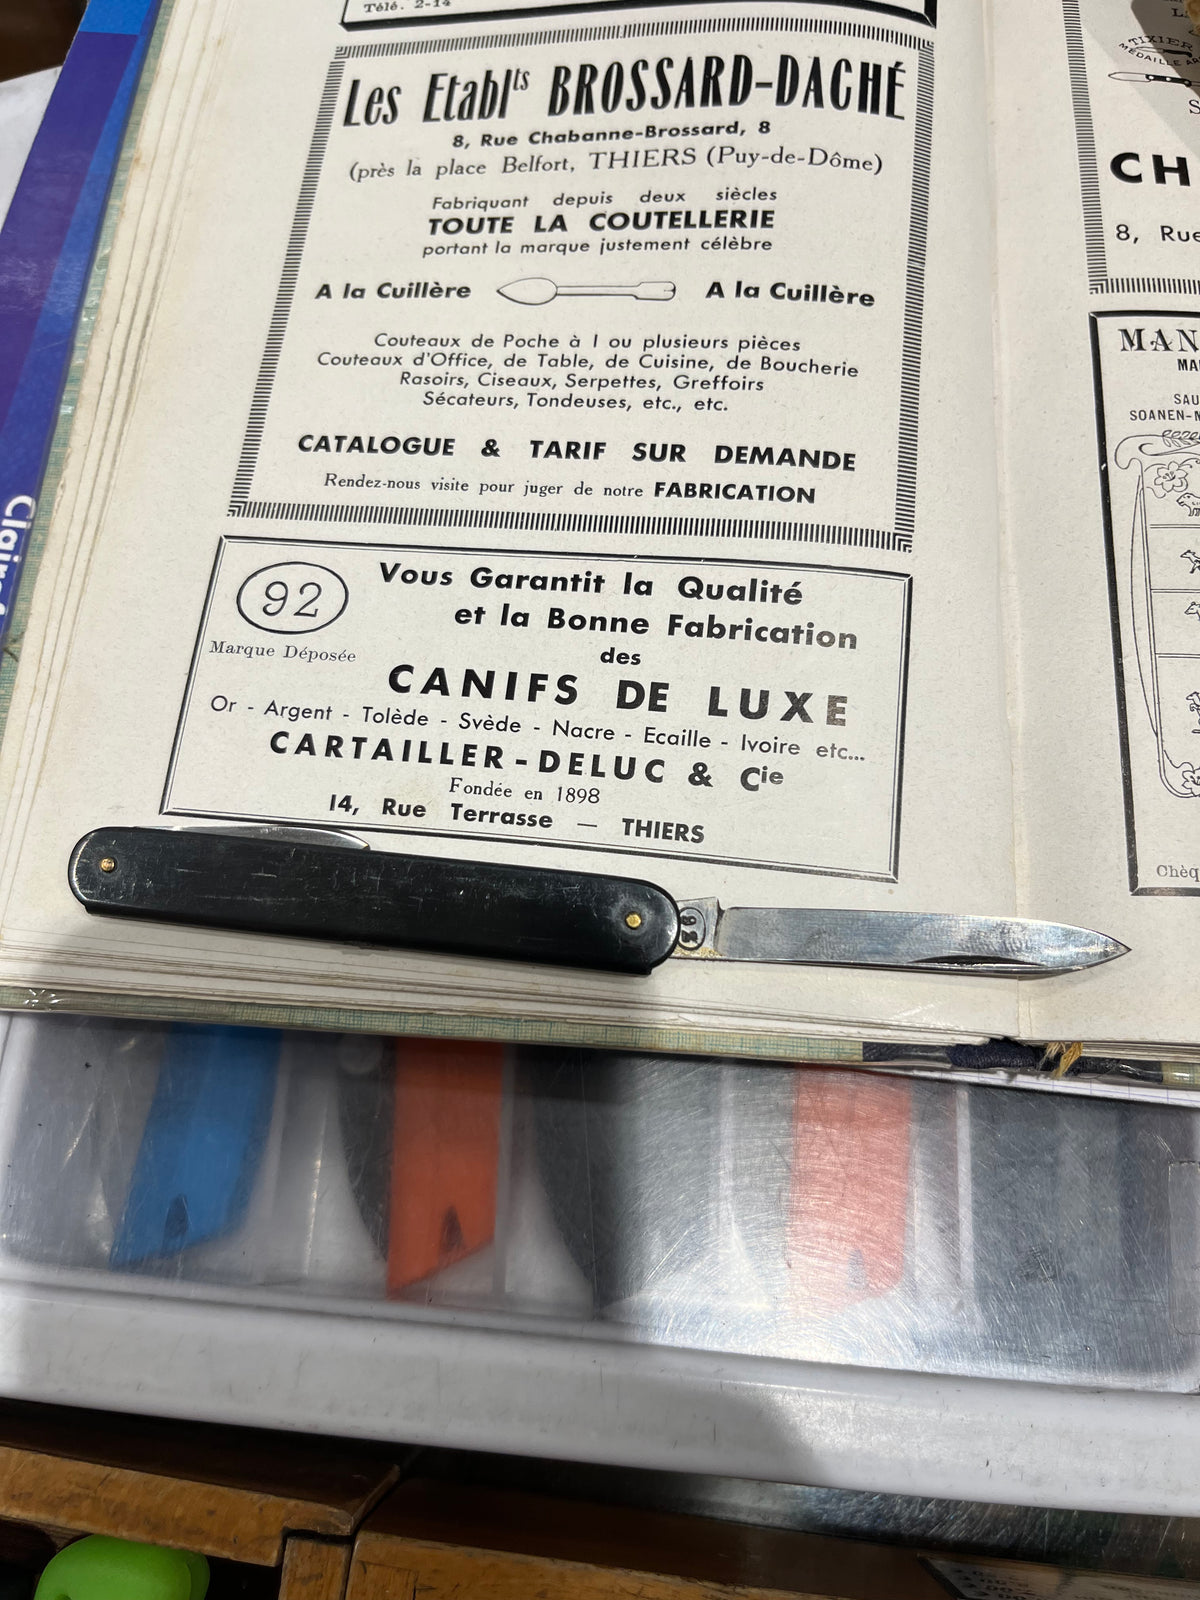 New VIntage Cartailler Deluc 92 3.25" Pen Knife Thiers, France 1970-80